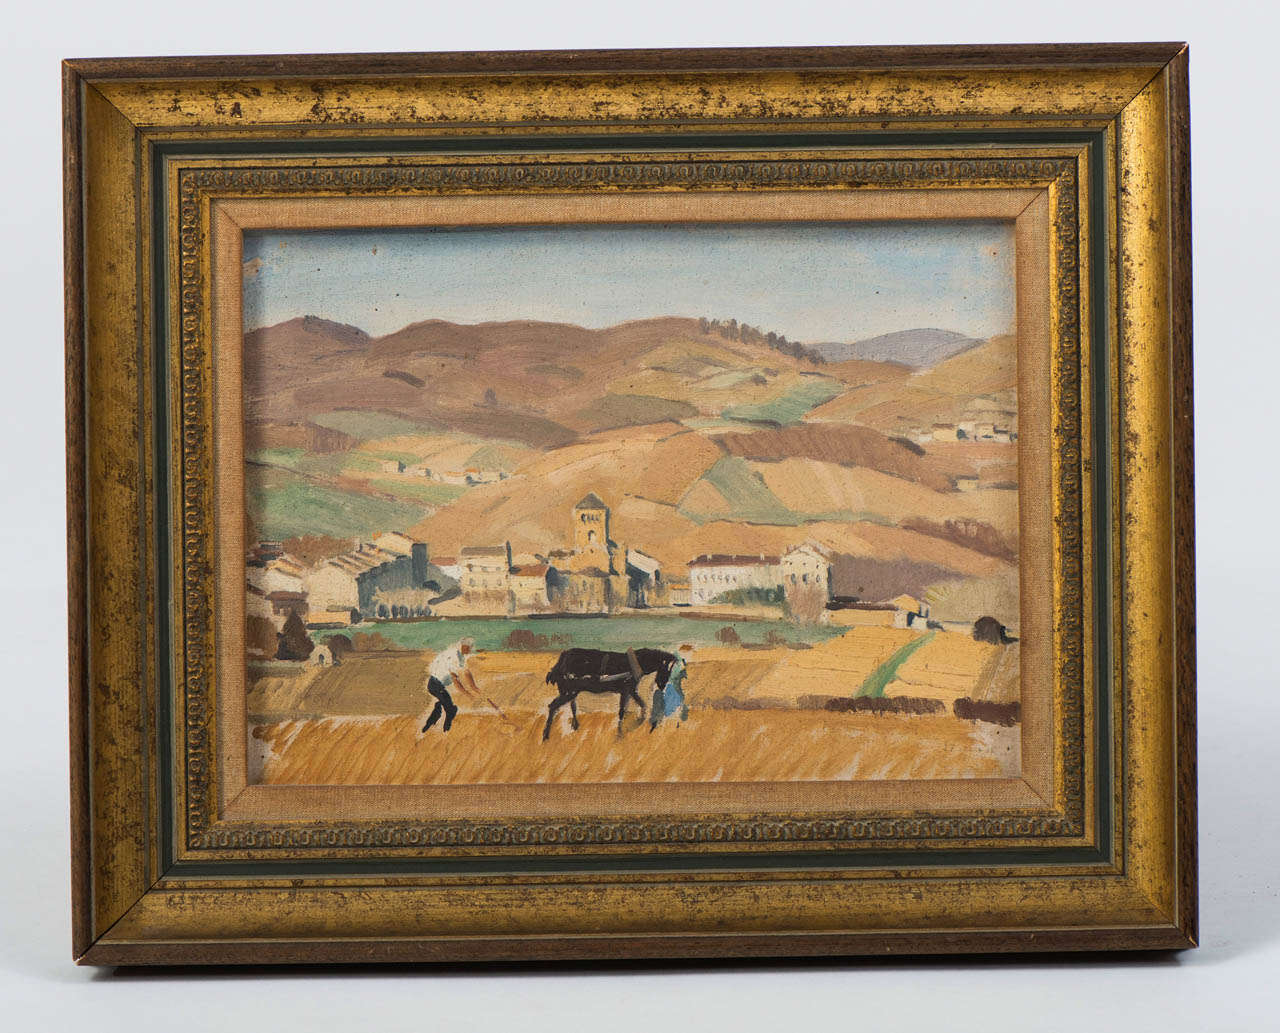 Adolphe Valette (1861-1942).  “Salles, Ploughing”
Oil painting on board.
Prov; Tib Lane Gallery, Manchester with copy of the original receipt dated 1971.
23cms x 29.5cms

Pierre Adolphe Valette (1876-1942) was born in St Etienne in 1876, he trained